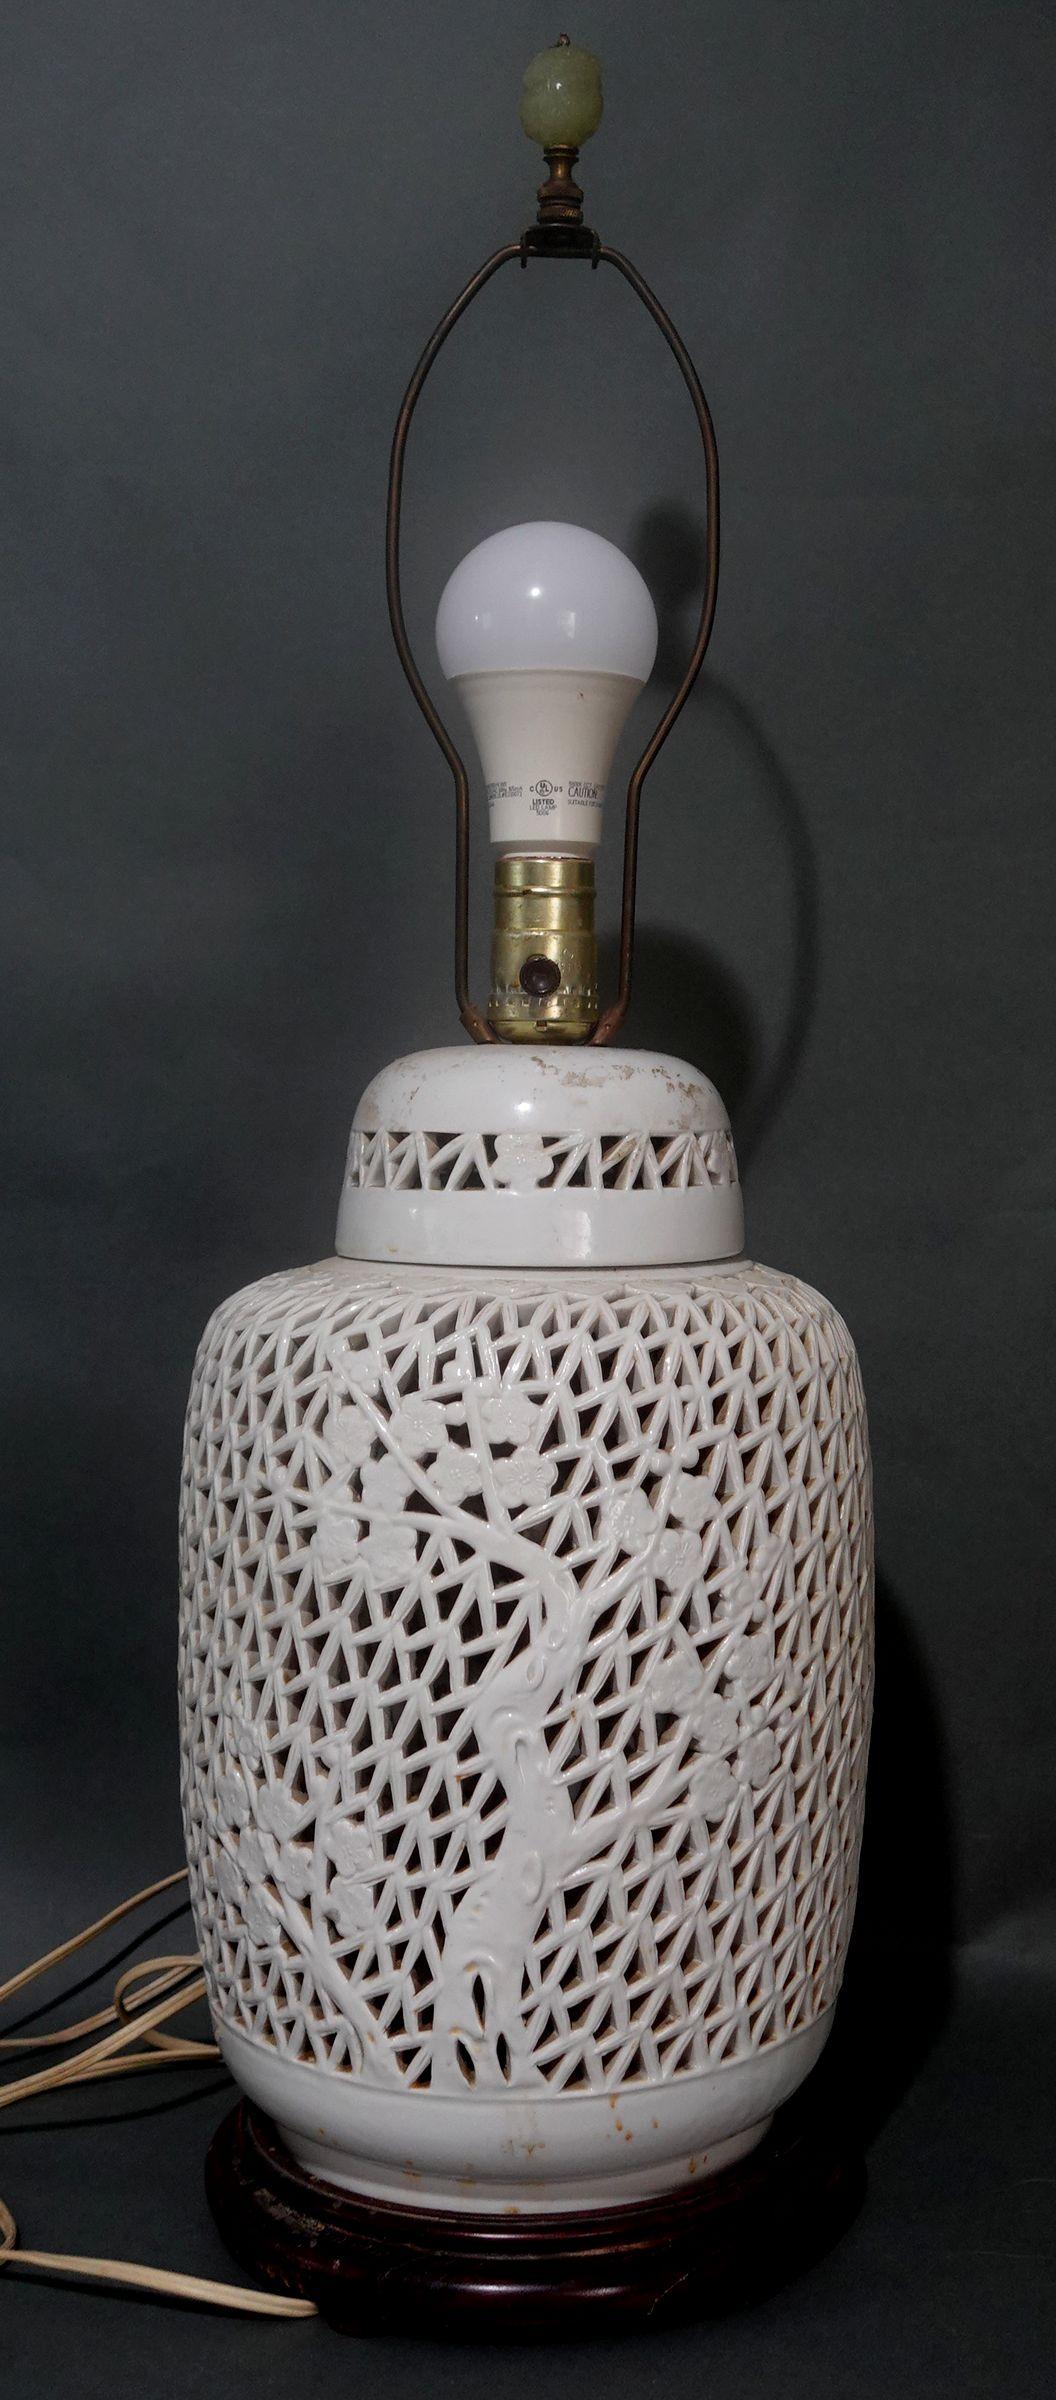 Beautiful reticulated white porcelain lamp with foliate scroll background and flowers in low relief on the body of the lamp.
The finale is a carved jade. The vase is in excellent condition, with no damage and no repairs, just some dust on it.
- It's